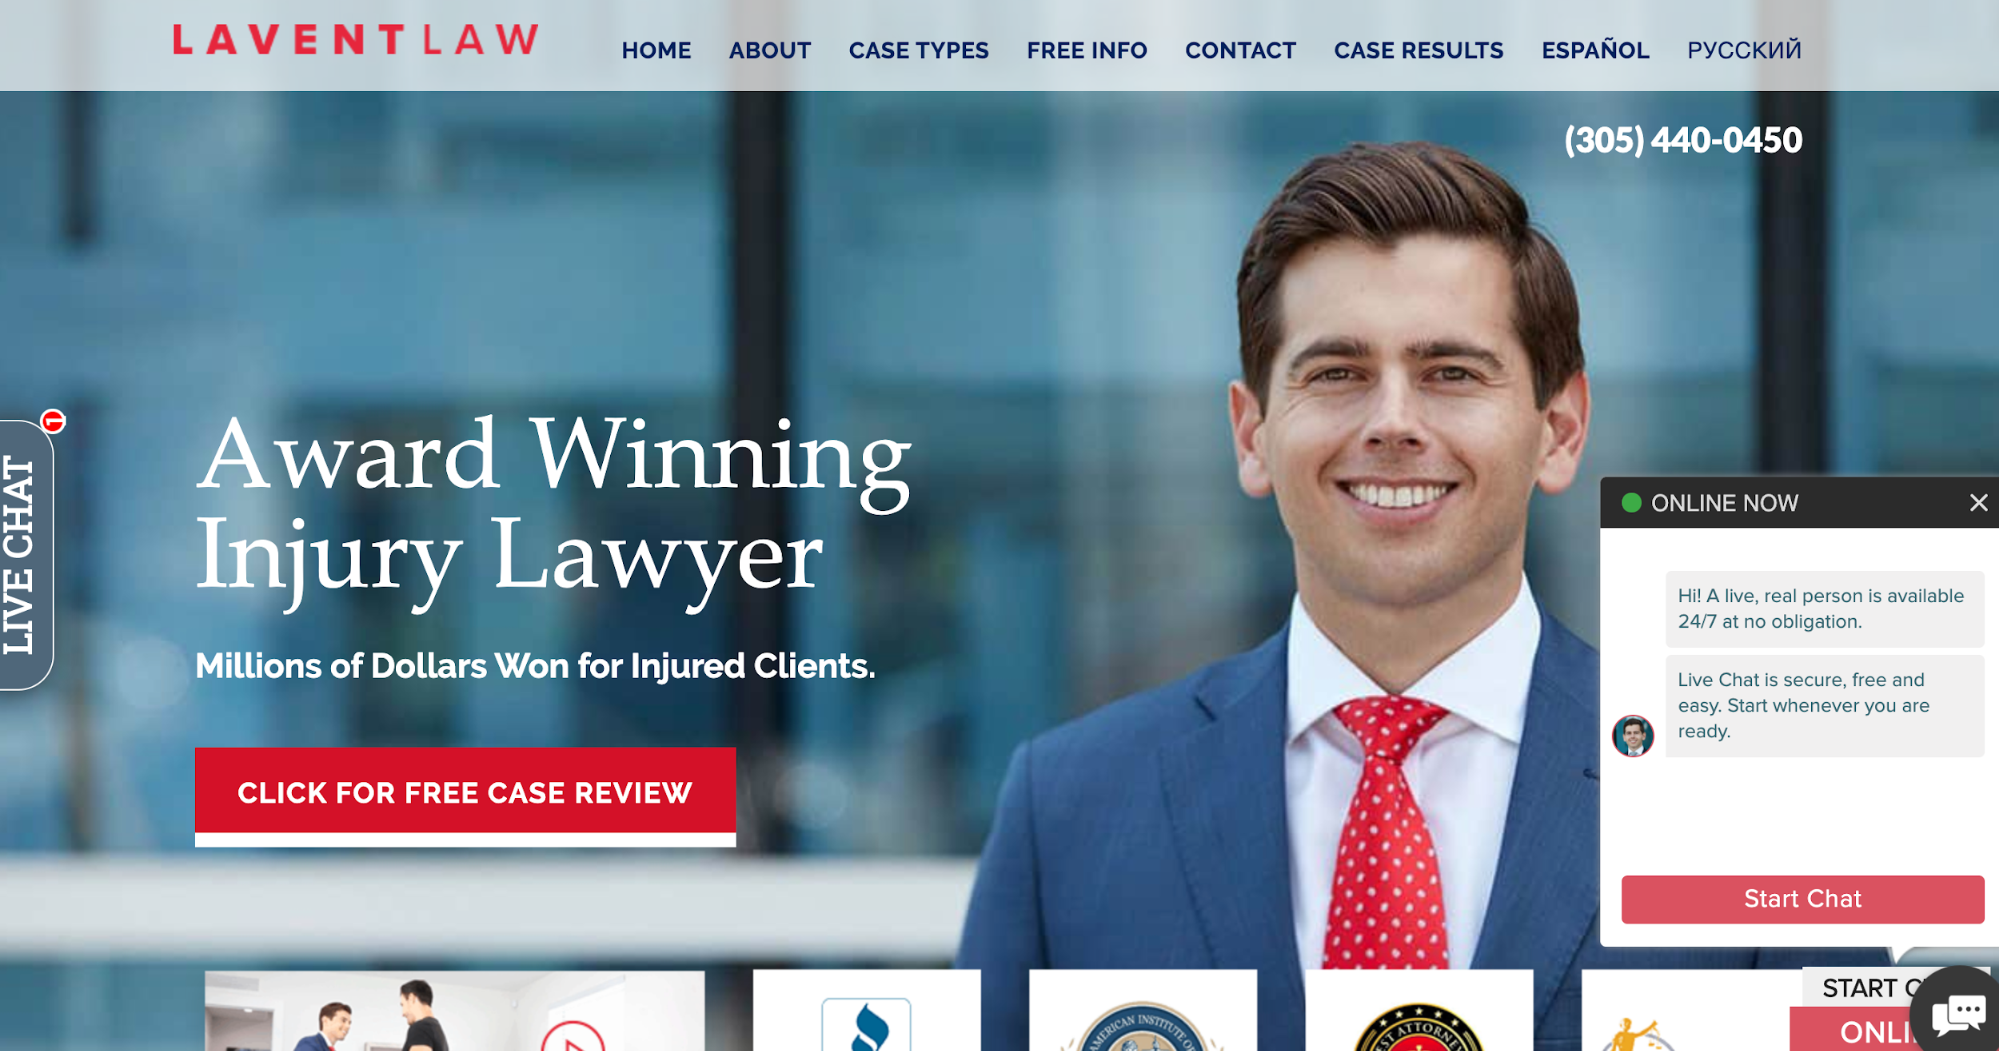 Lavent Law uses live chat on its landing page